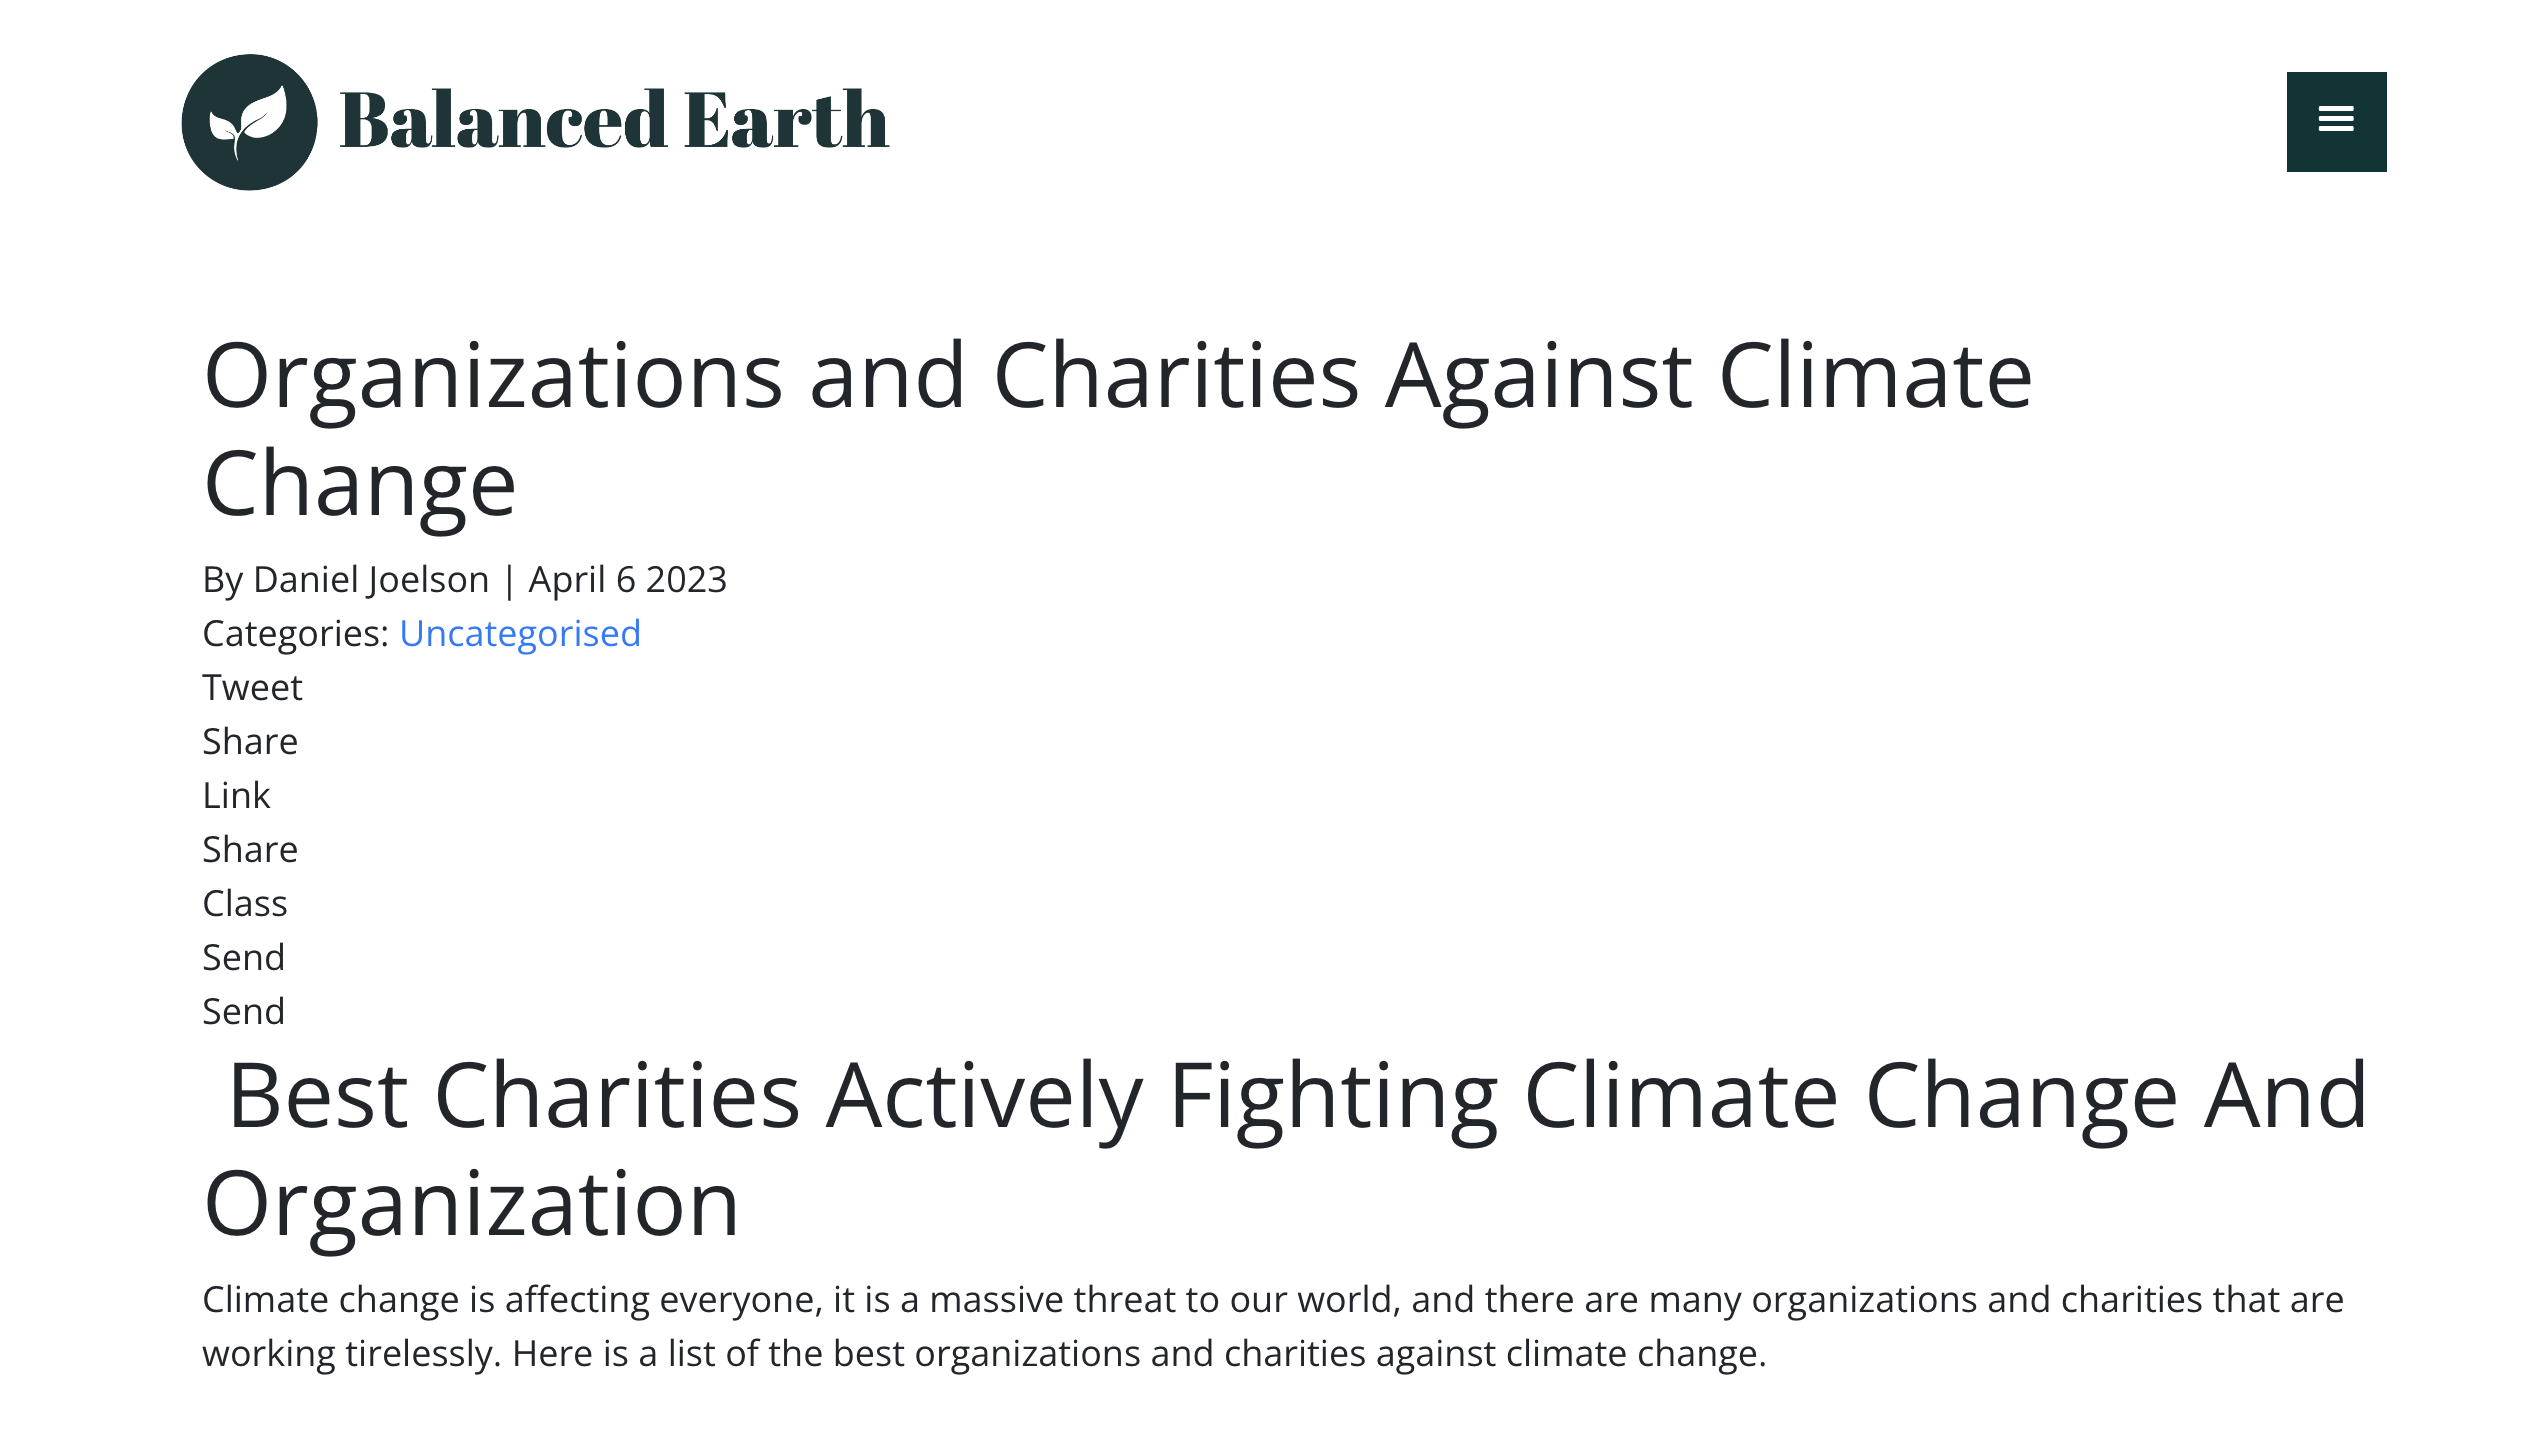 Balanced Earth Releases List of Best Organizations and Charities Against Climate Change